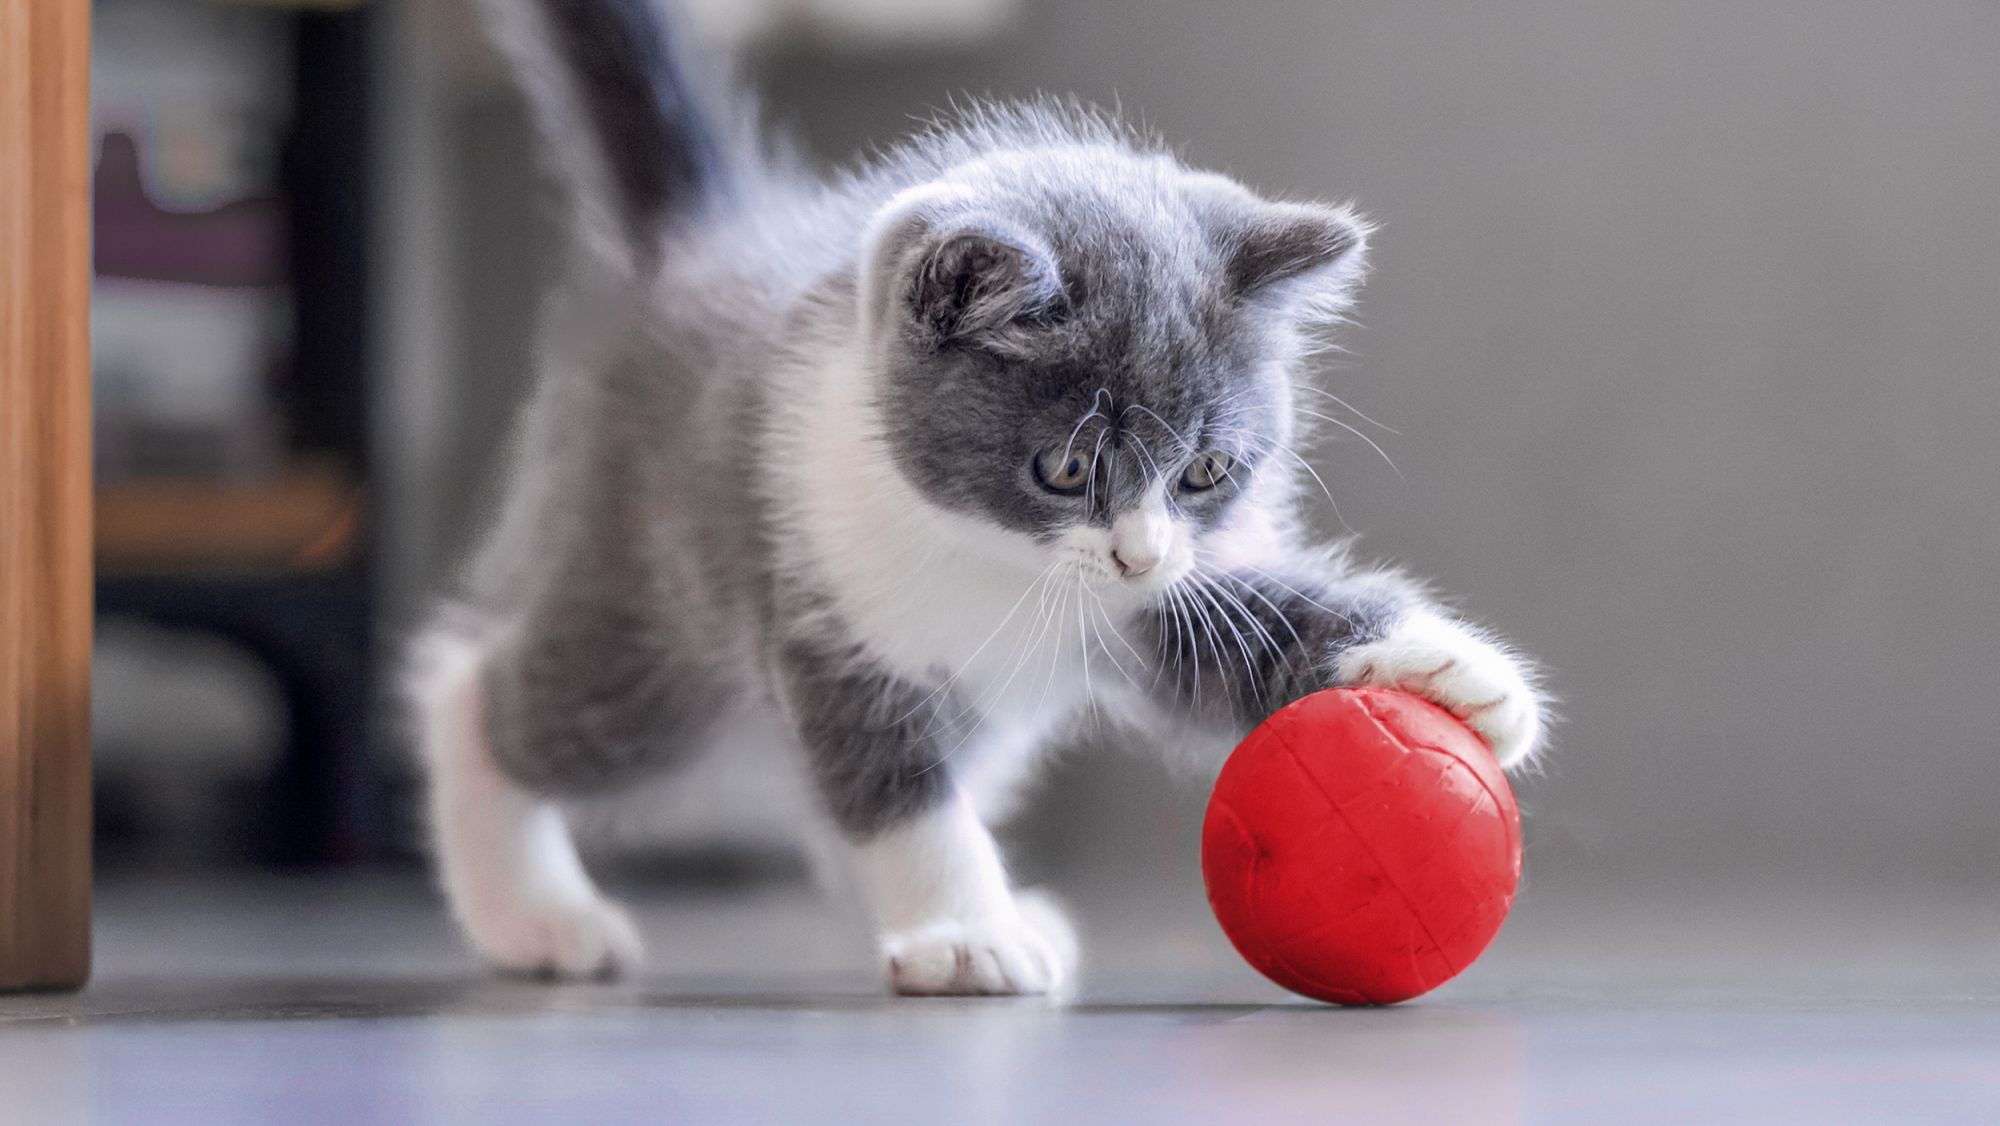 Kitten grey and white standing indoors playing with a red ball.